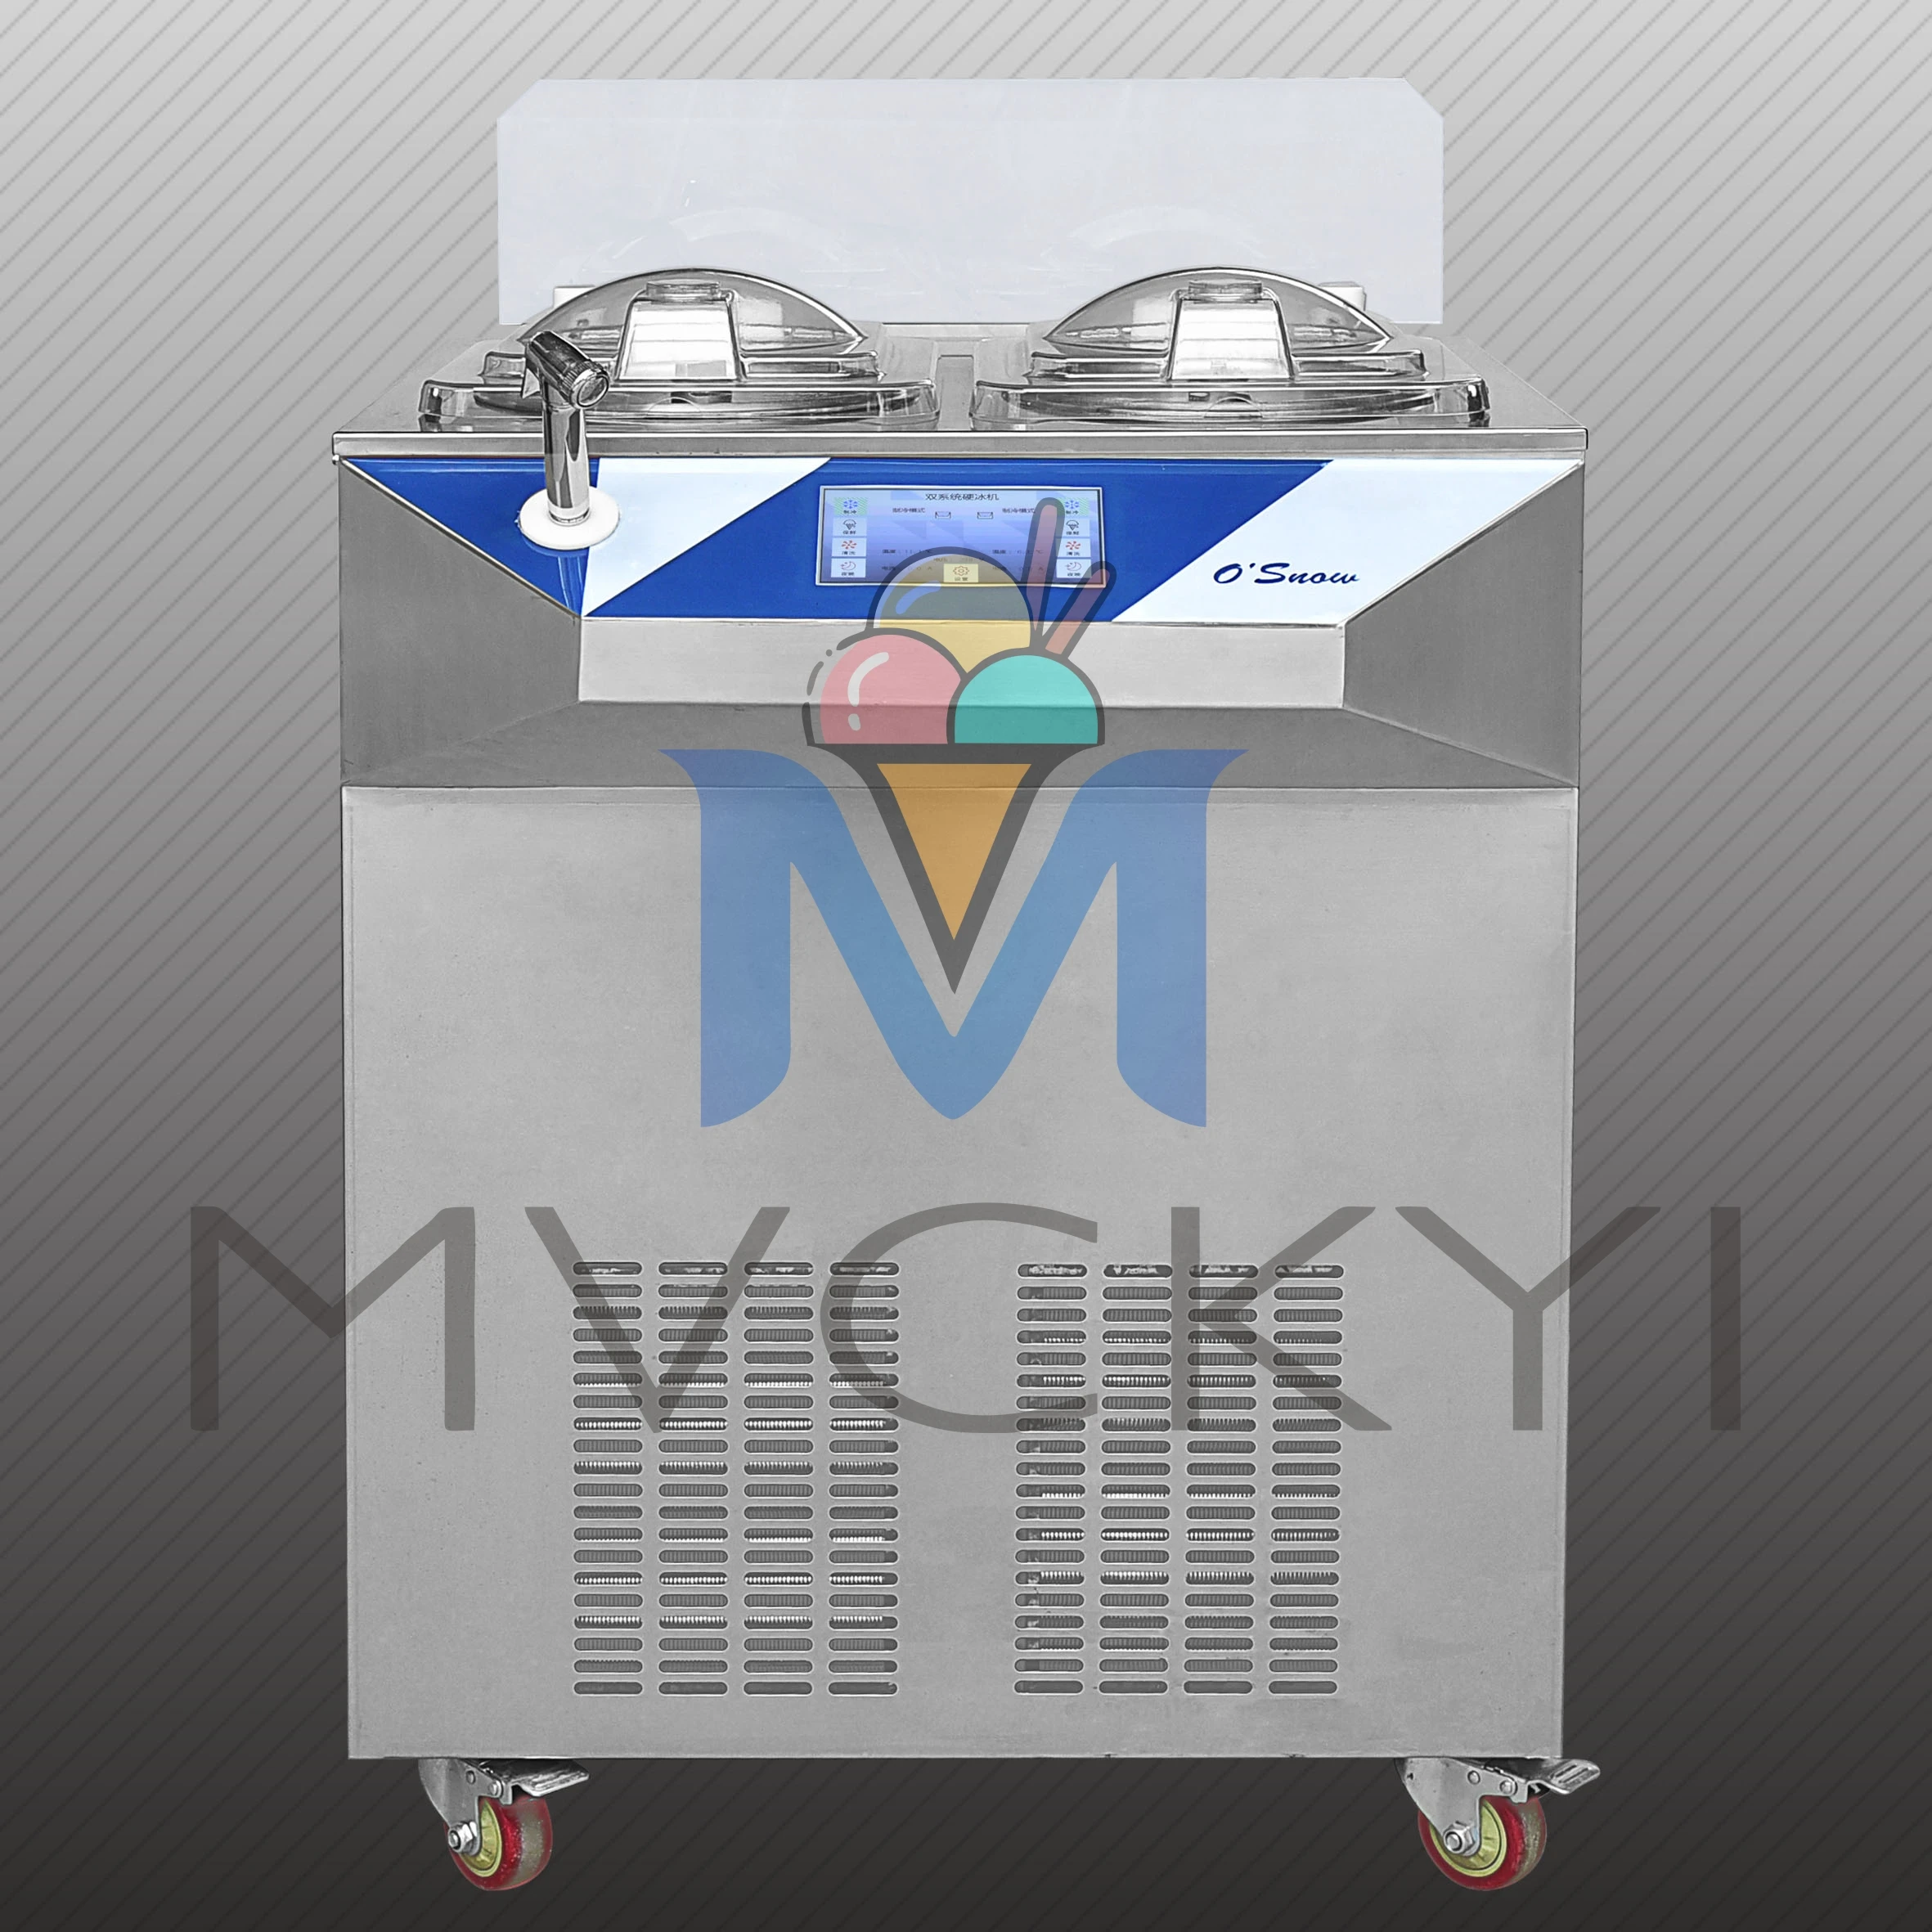 Mvckyi 40L/H Hard Ice Cream Machine/Countertop Gelato Maker /2 Batch Bowls Batch Freezer/Yogurt Making custom logo two way splitter and double bowls machine automatic poultry smart feeder pet with app for dogs and cats